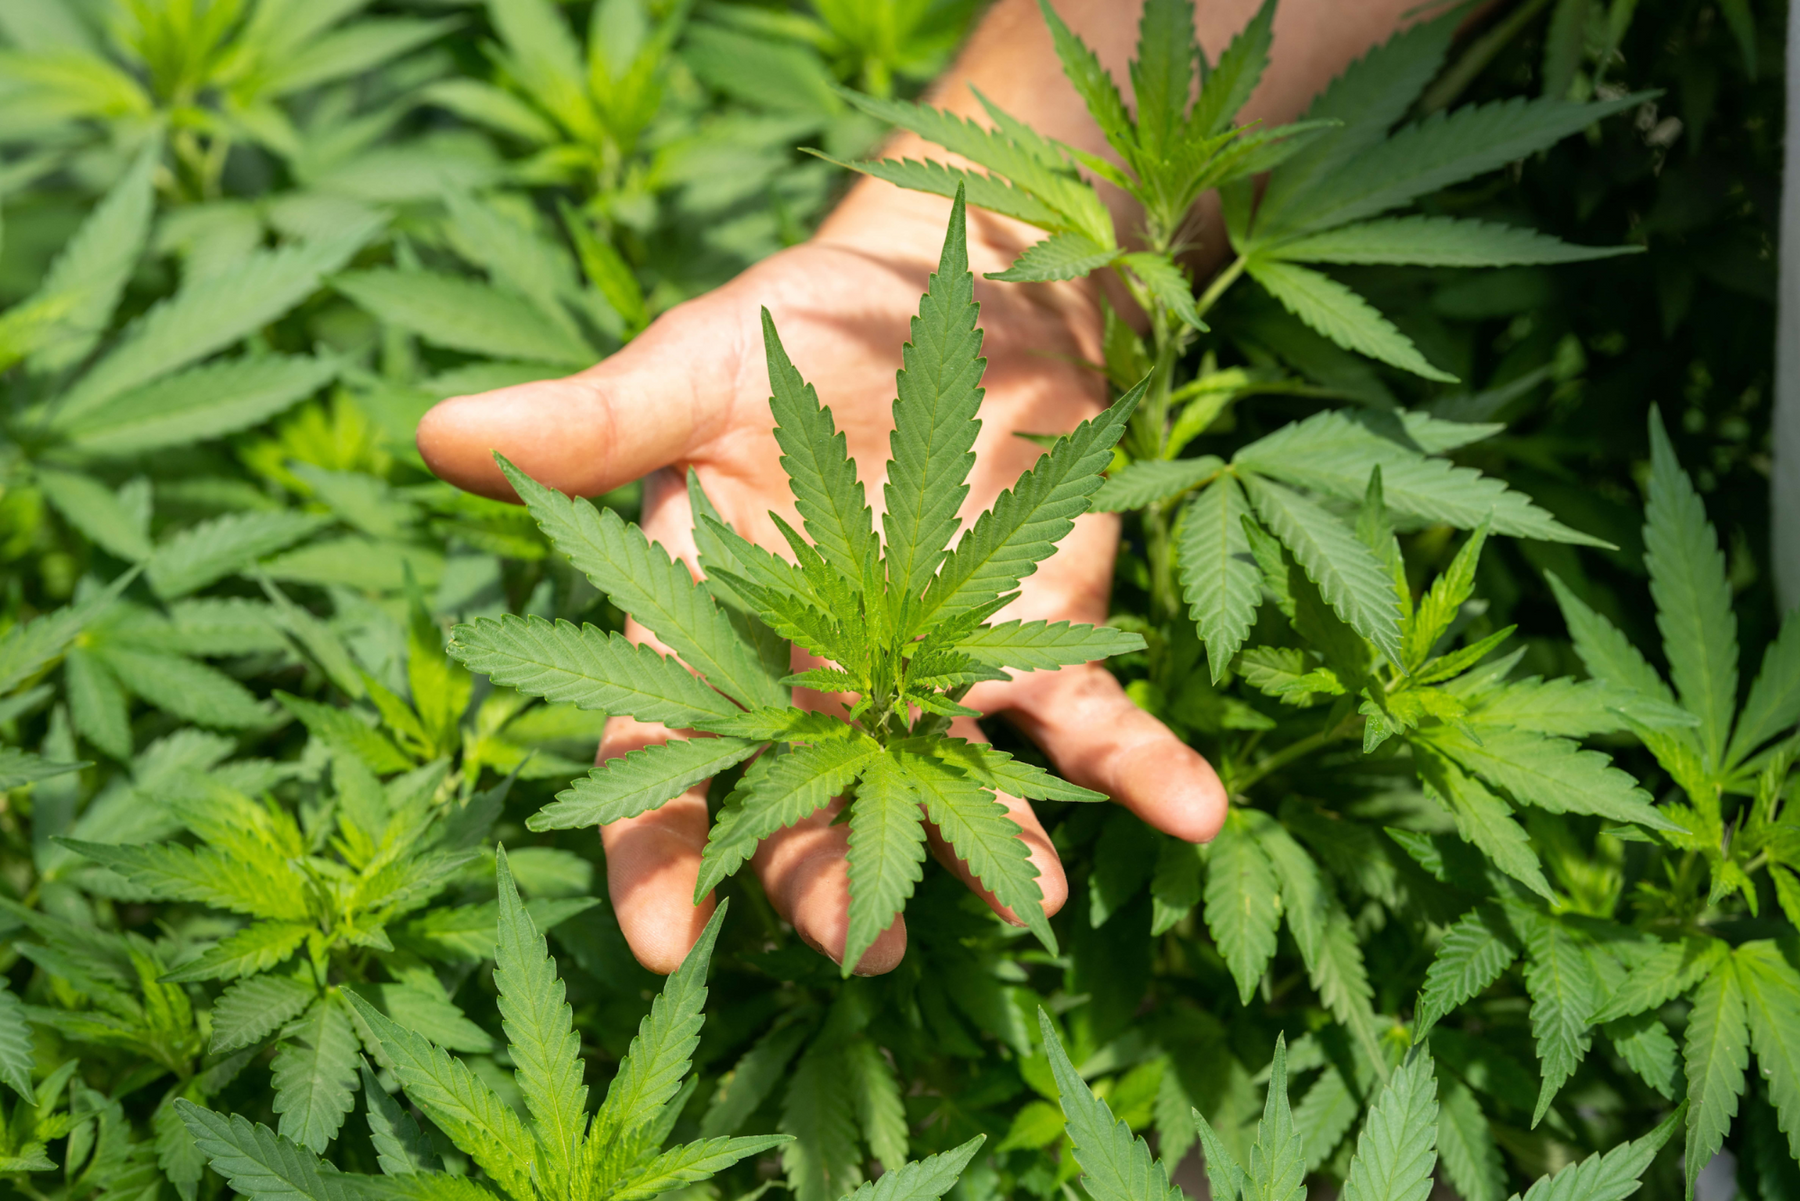 Hand holding weed leaves amongst many weed plants